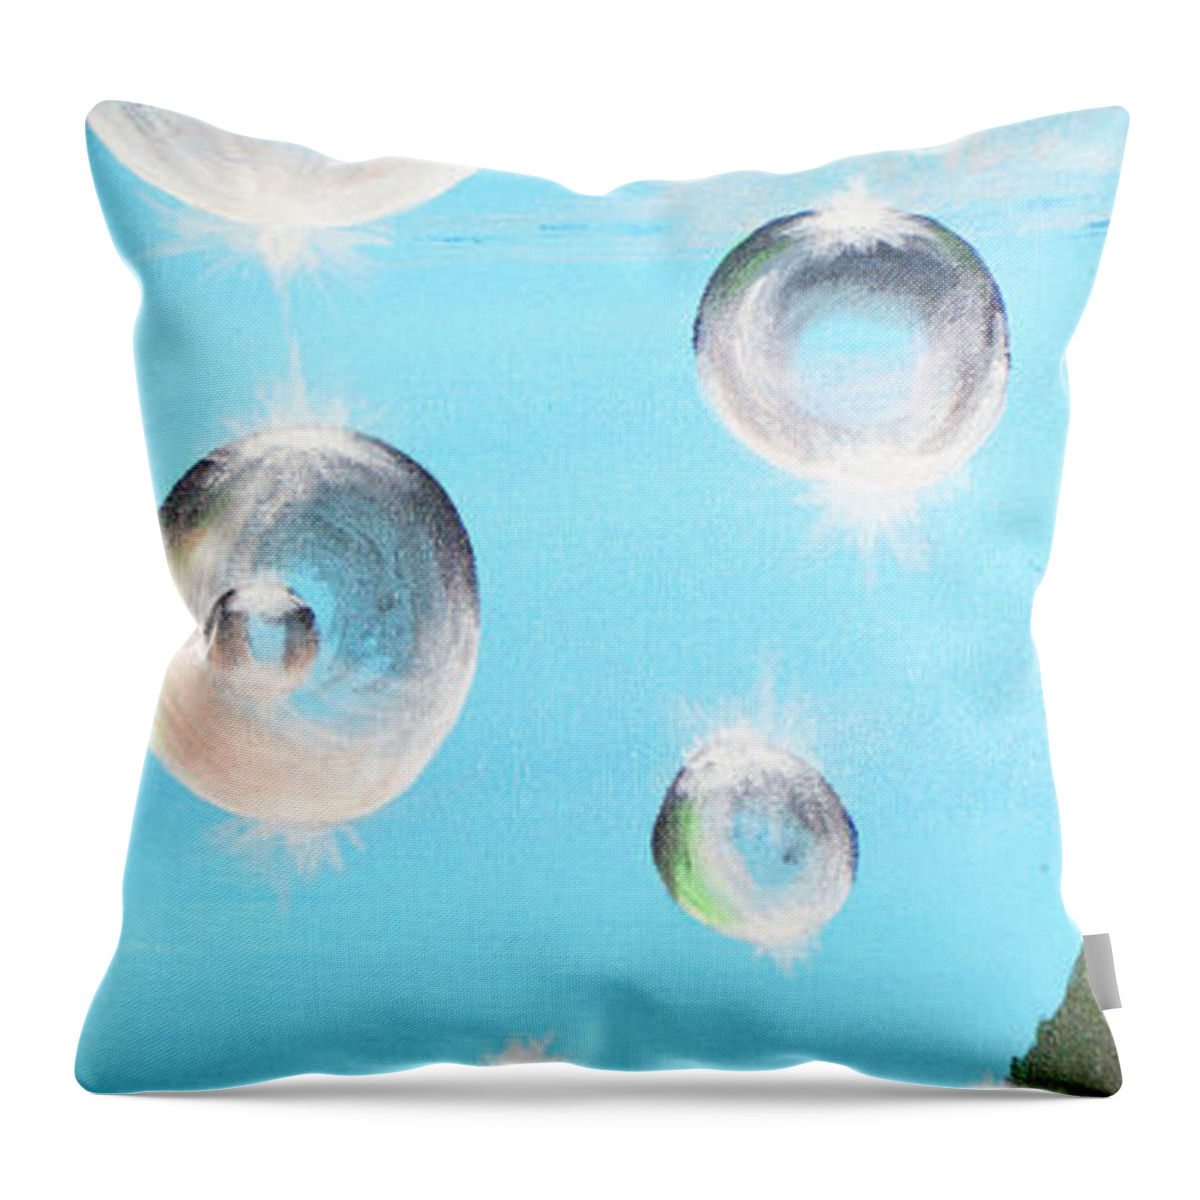 Blue Throw Pillow featuring the painting Bubbles 1 by Medea Ioseliani